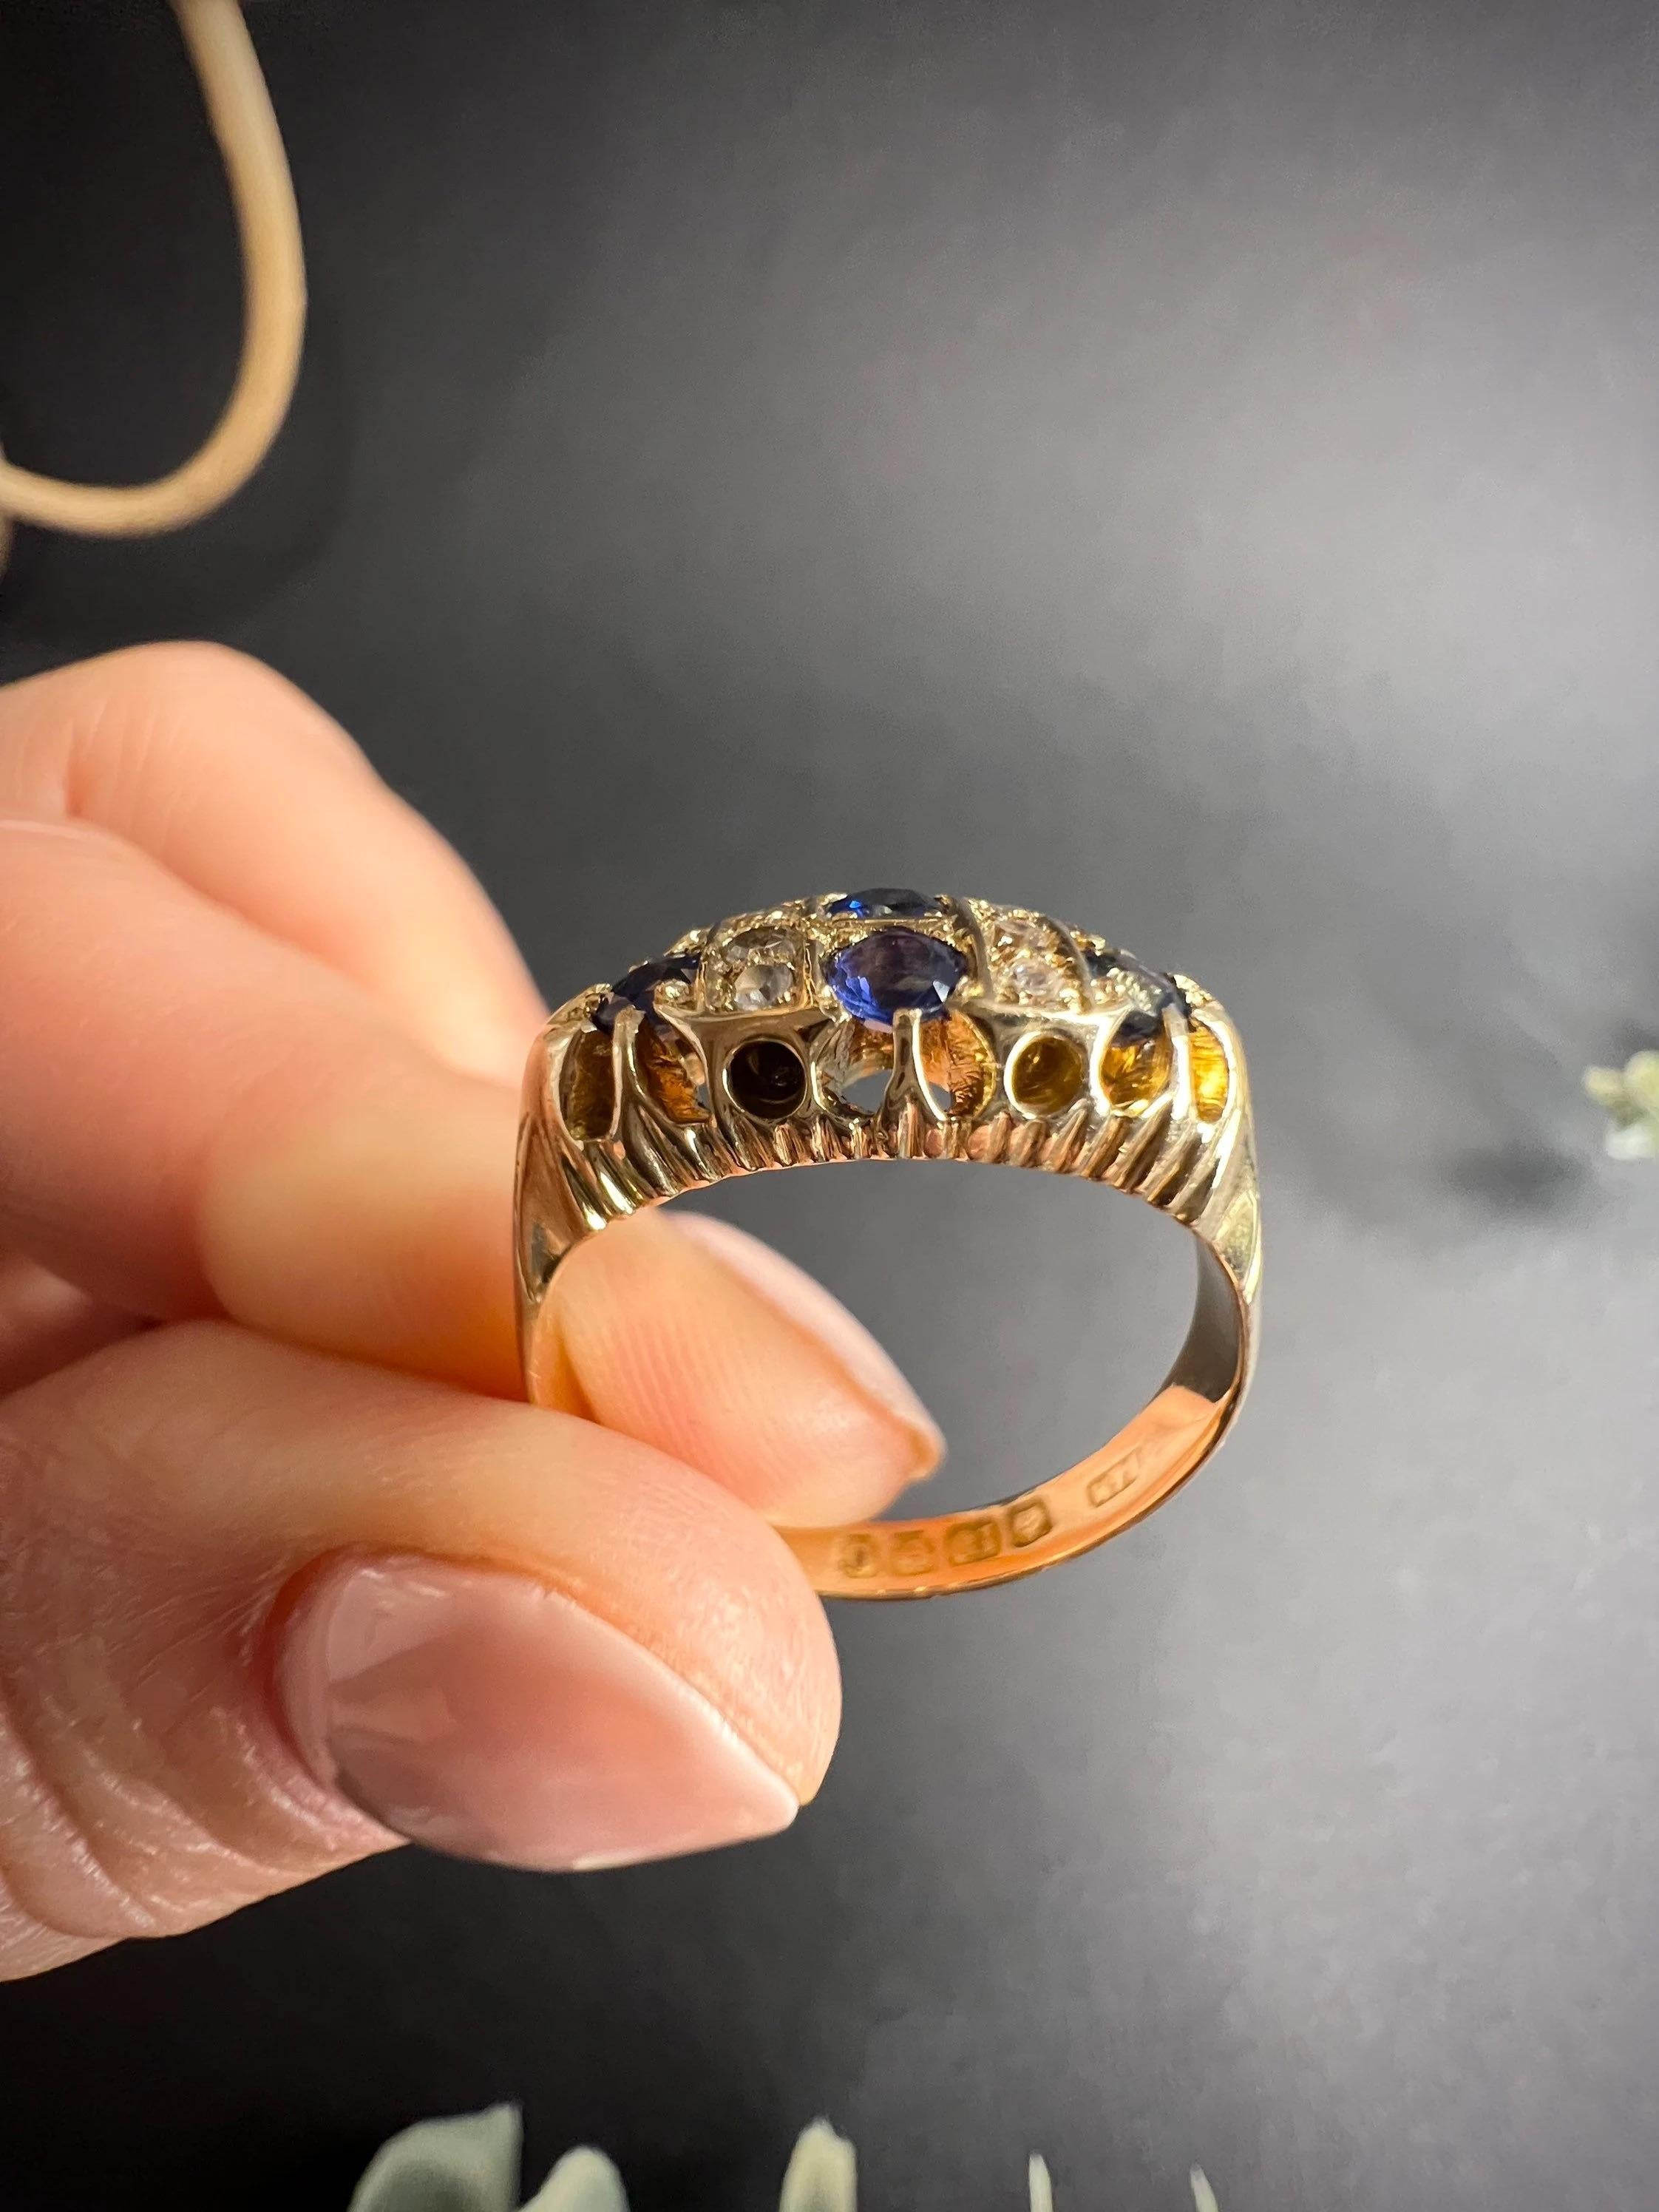 Antique Sapphire & Diamond Ring 

18ct Gold 

Hallmarked Birmingham 1913

Makers Mark B&M 

Fabulous Two Row Chequerboard Design Ring. 
Set with Beautiful Blue Sapphires & Sparkling Diamonds.

Face of The Ring Measures Approx 15.5mm x 7.2mm

UK Size